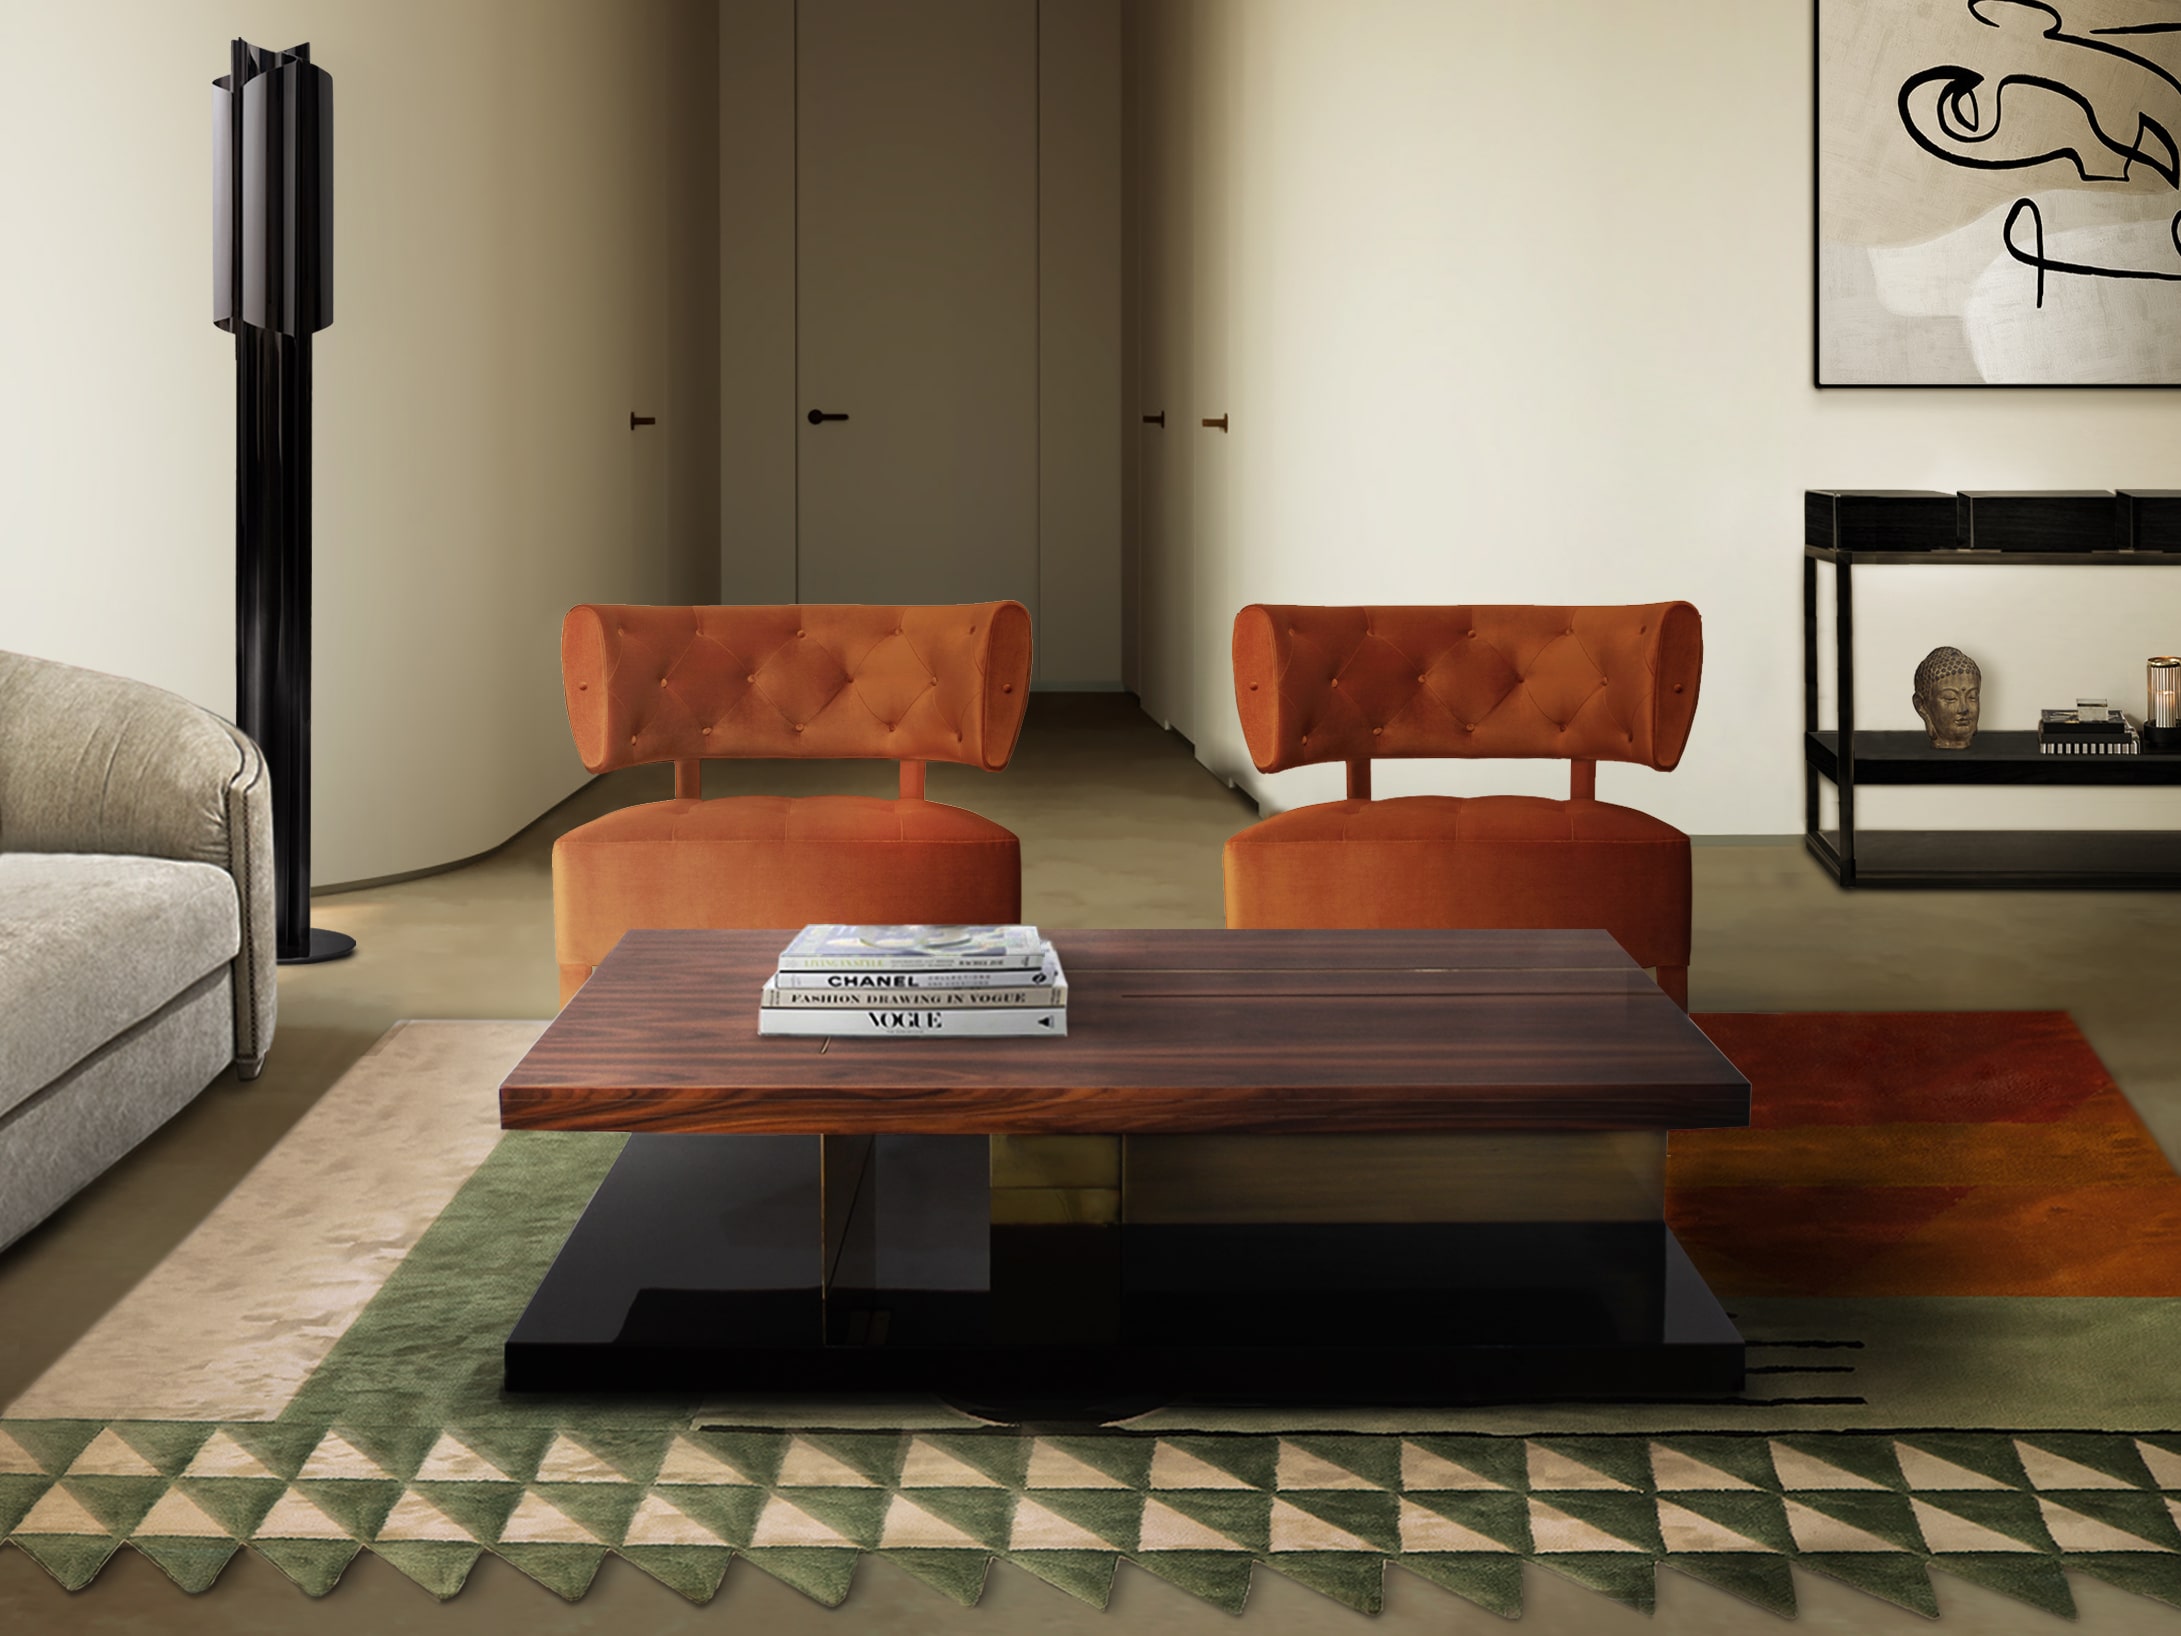 Modern Midcentury Living Room Design with Velvet Armchairs and Wood Rectangular Coffee Table - Home'Society